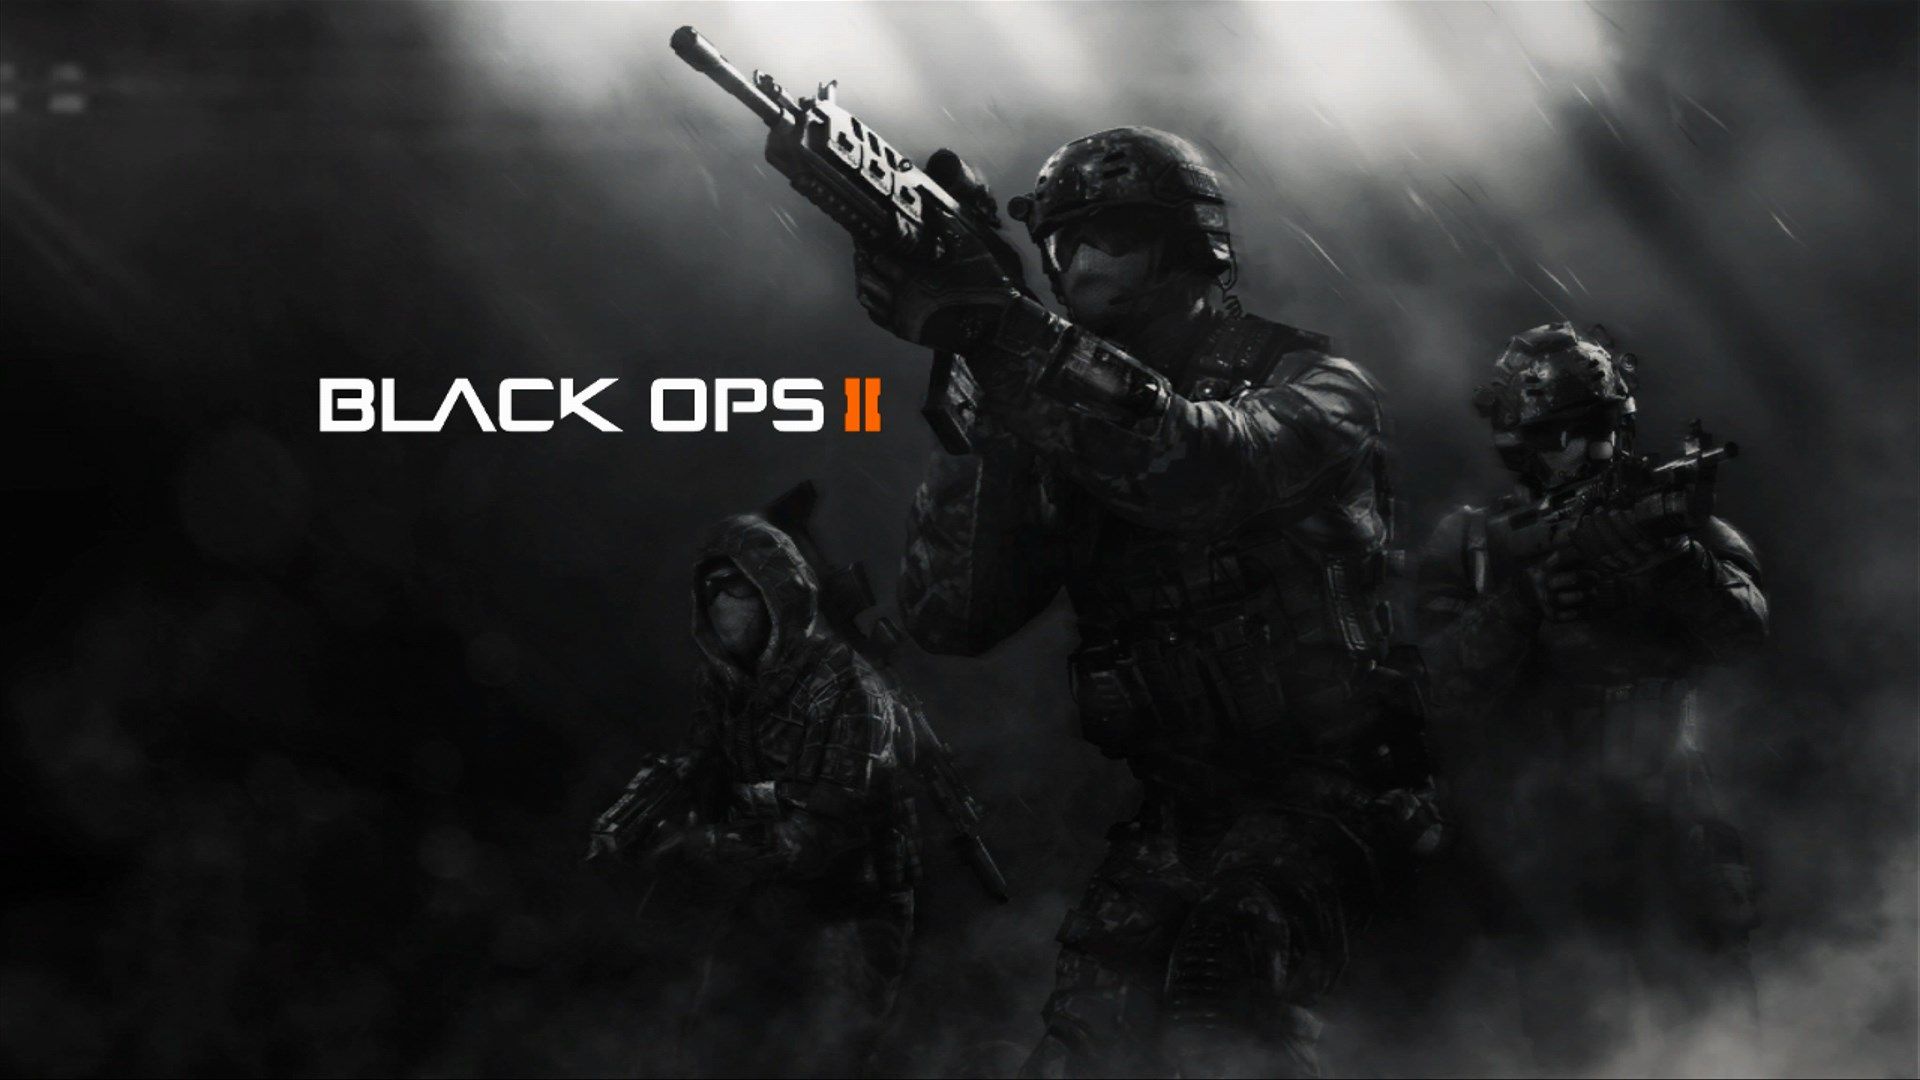 computer wallpaper for call of duty black ops ii. Call of duty black, Black ops, Call of duty